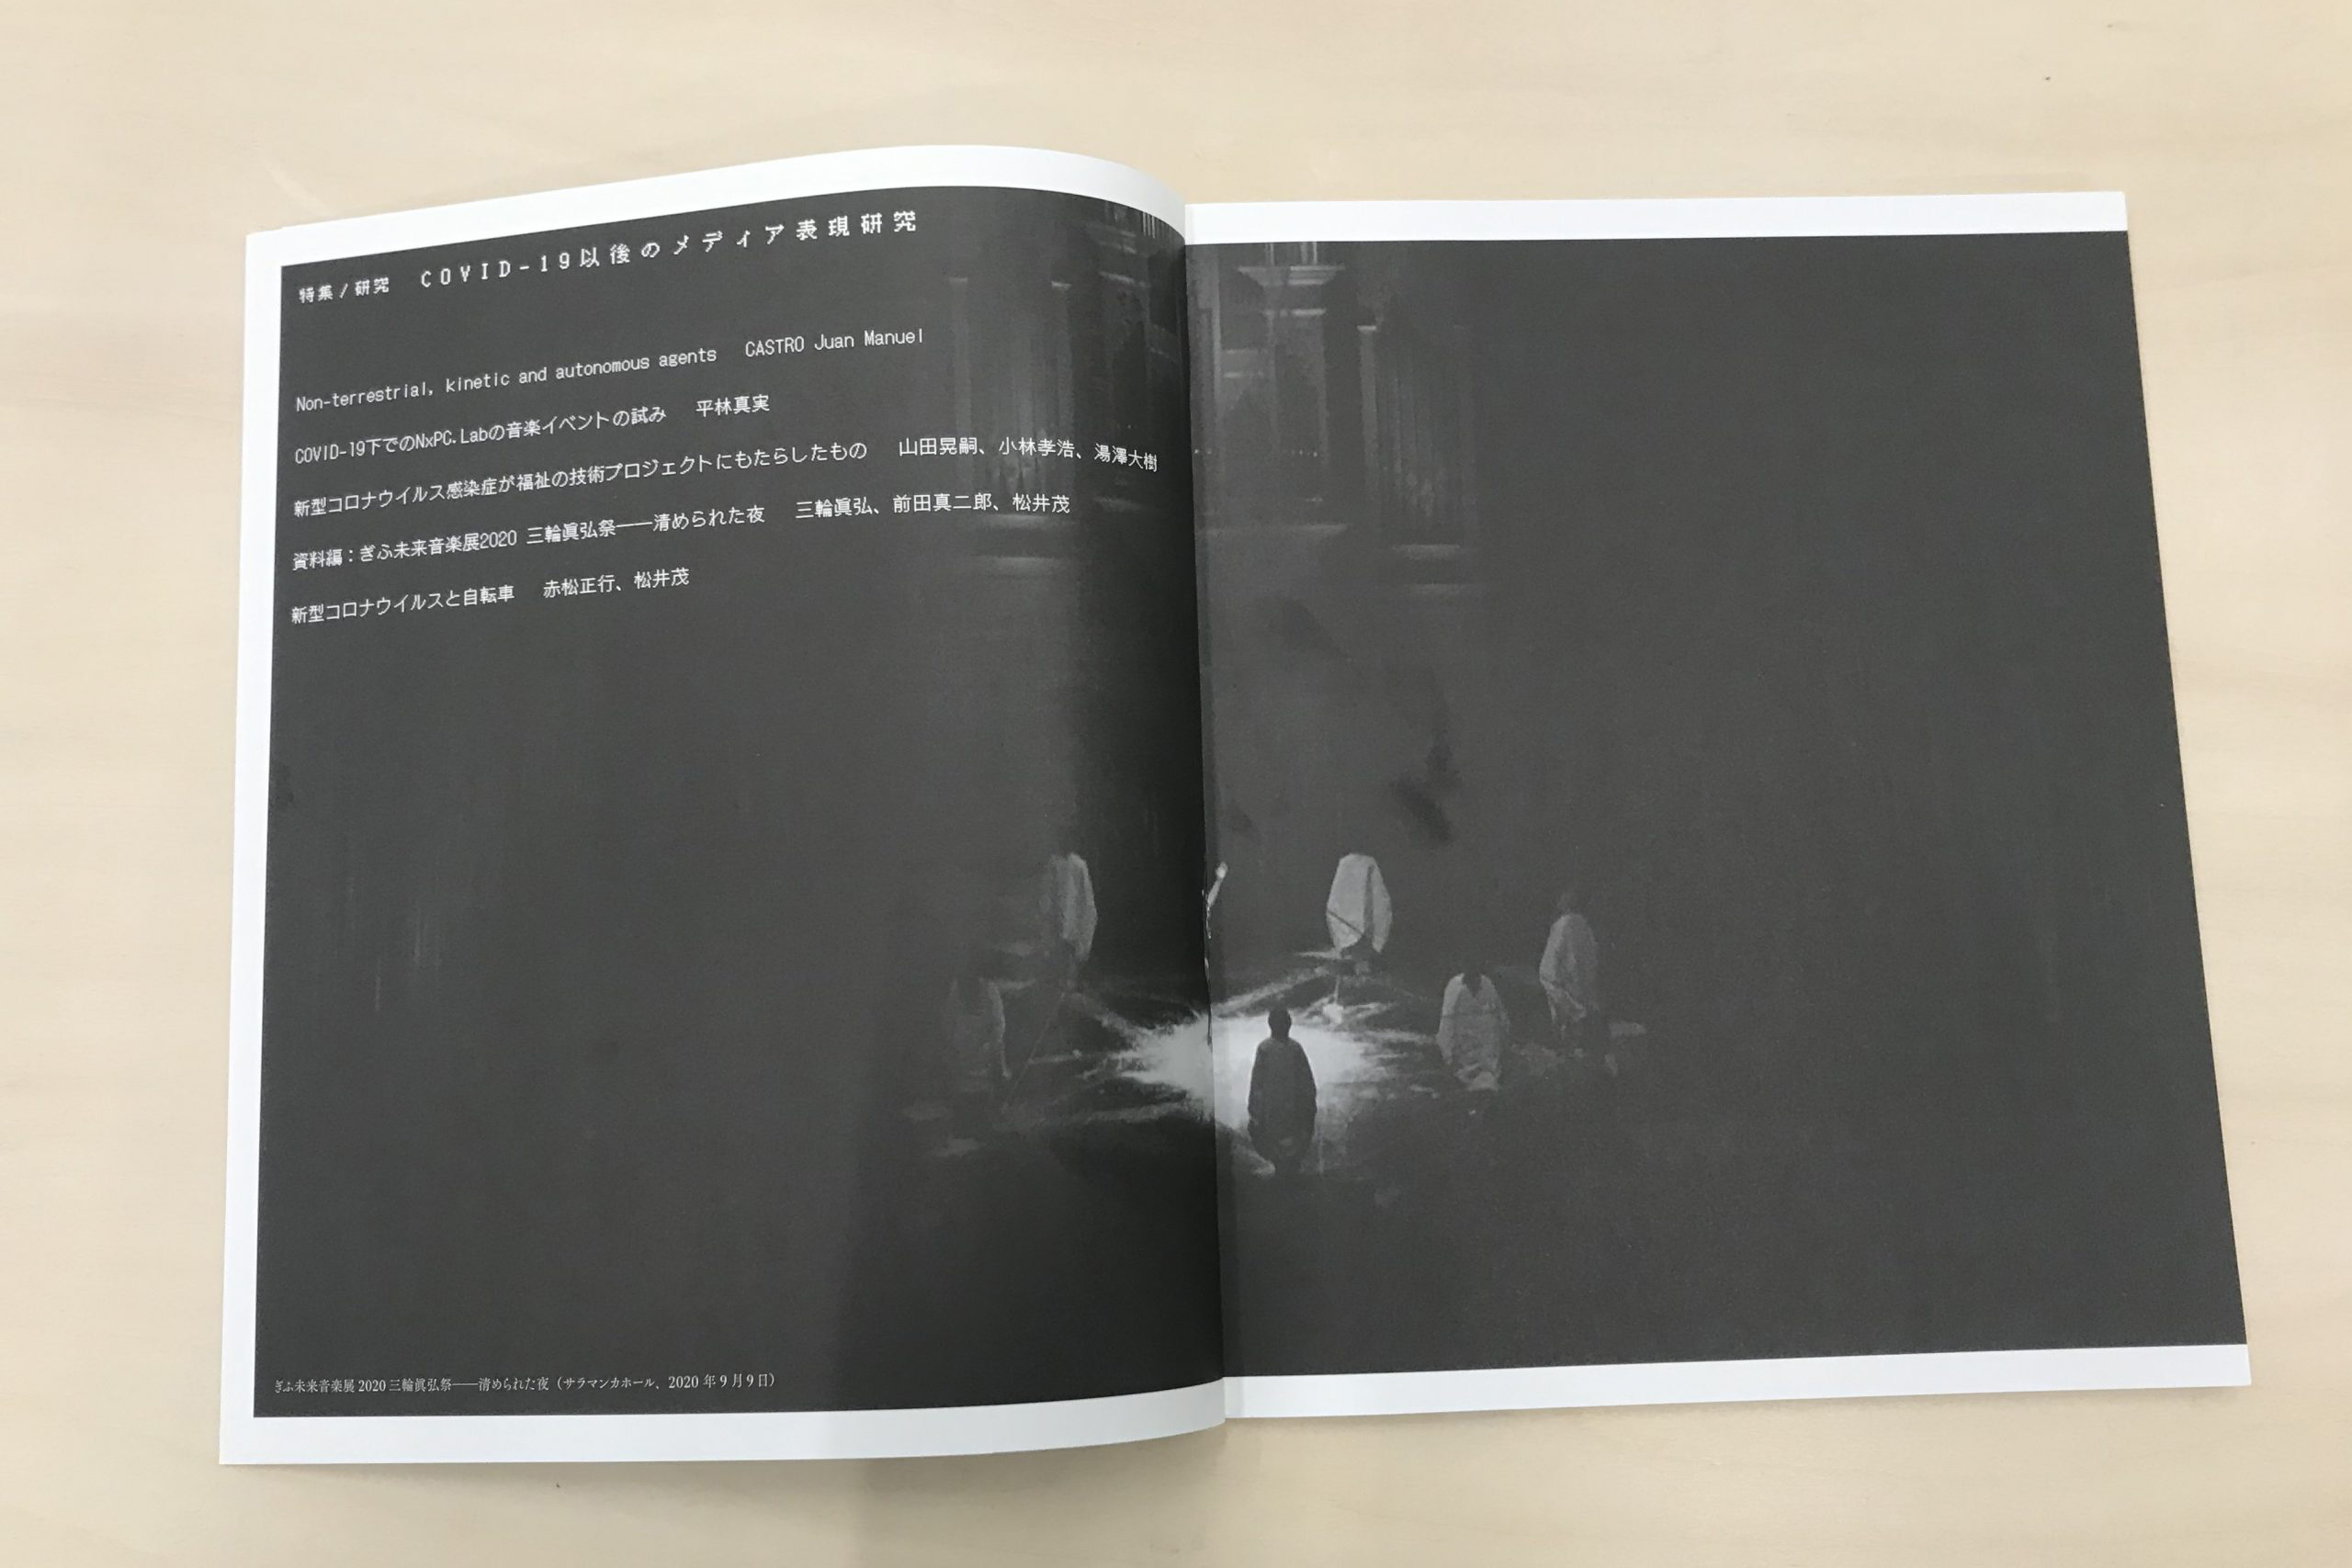 Journal of Institute of Advanced Media Arts and Sciences, Vol. 12イメージ